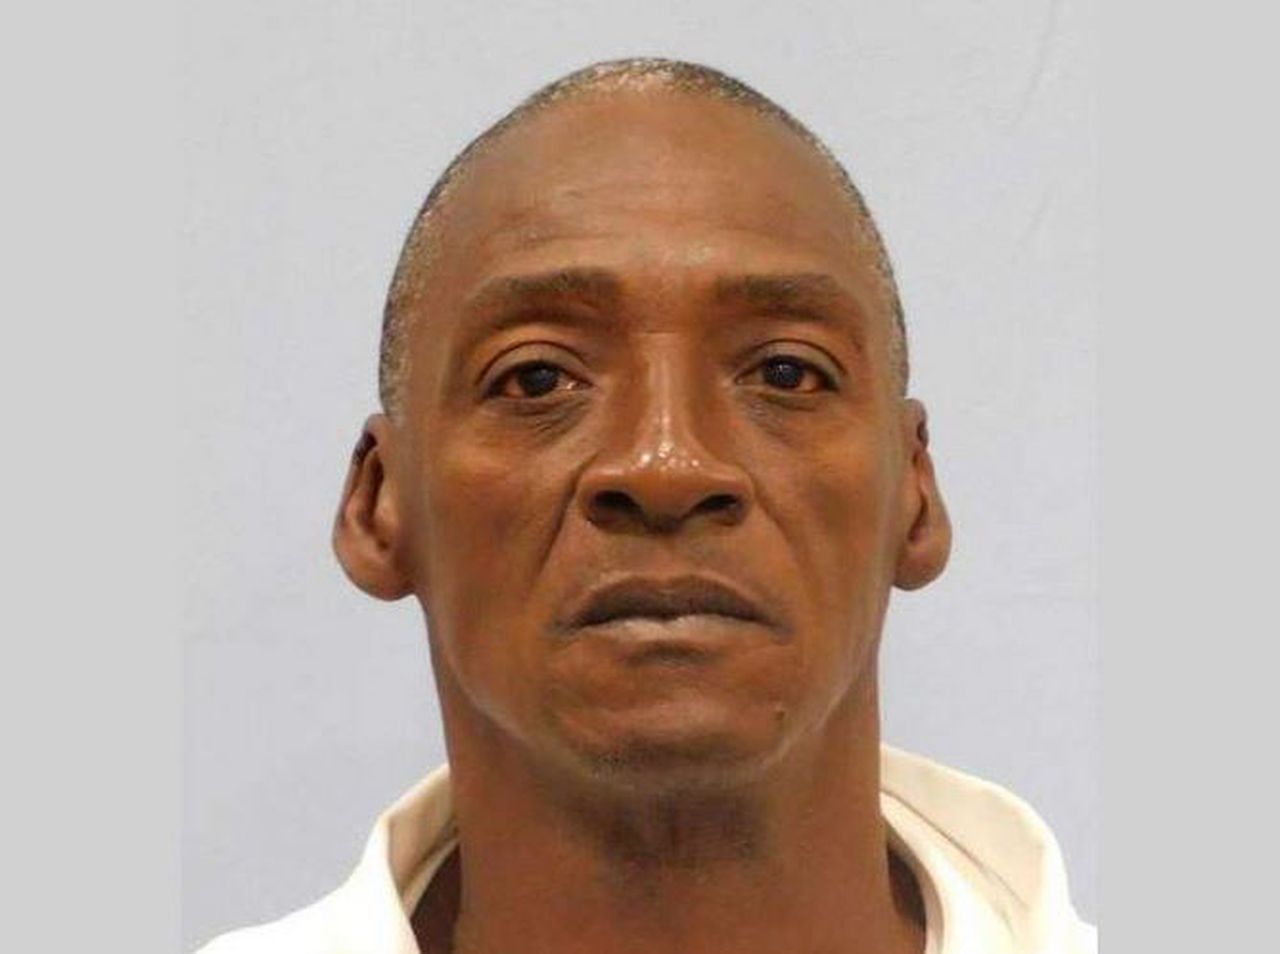 Family sought for 60-year-old inmate who died at Donaldson Correctional Facility